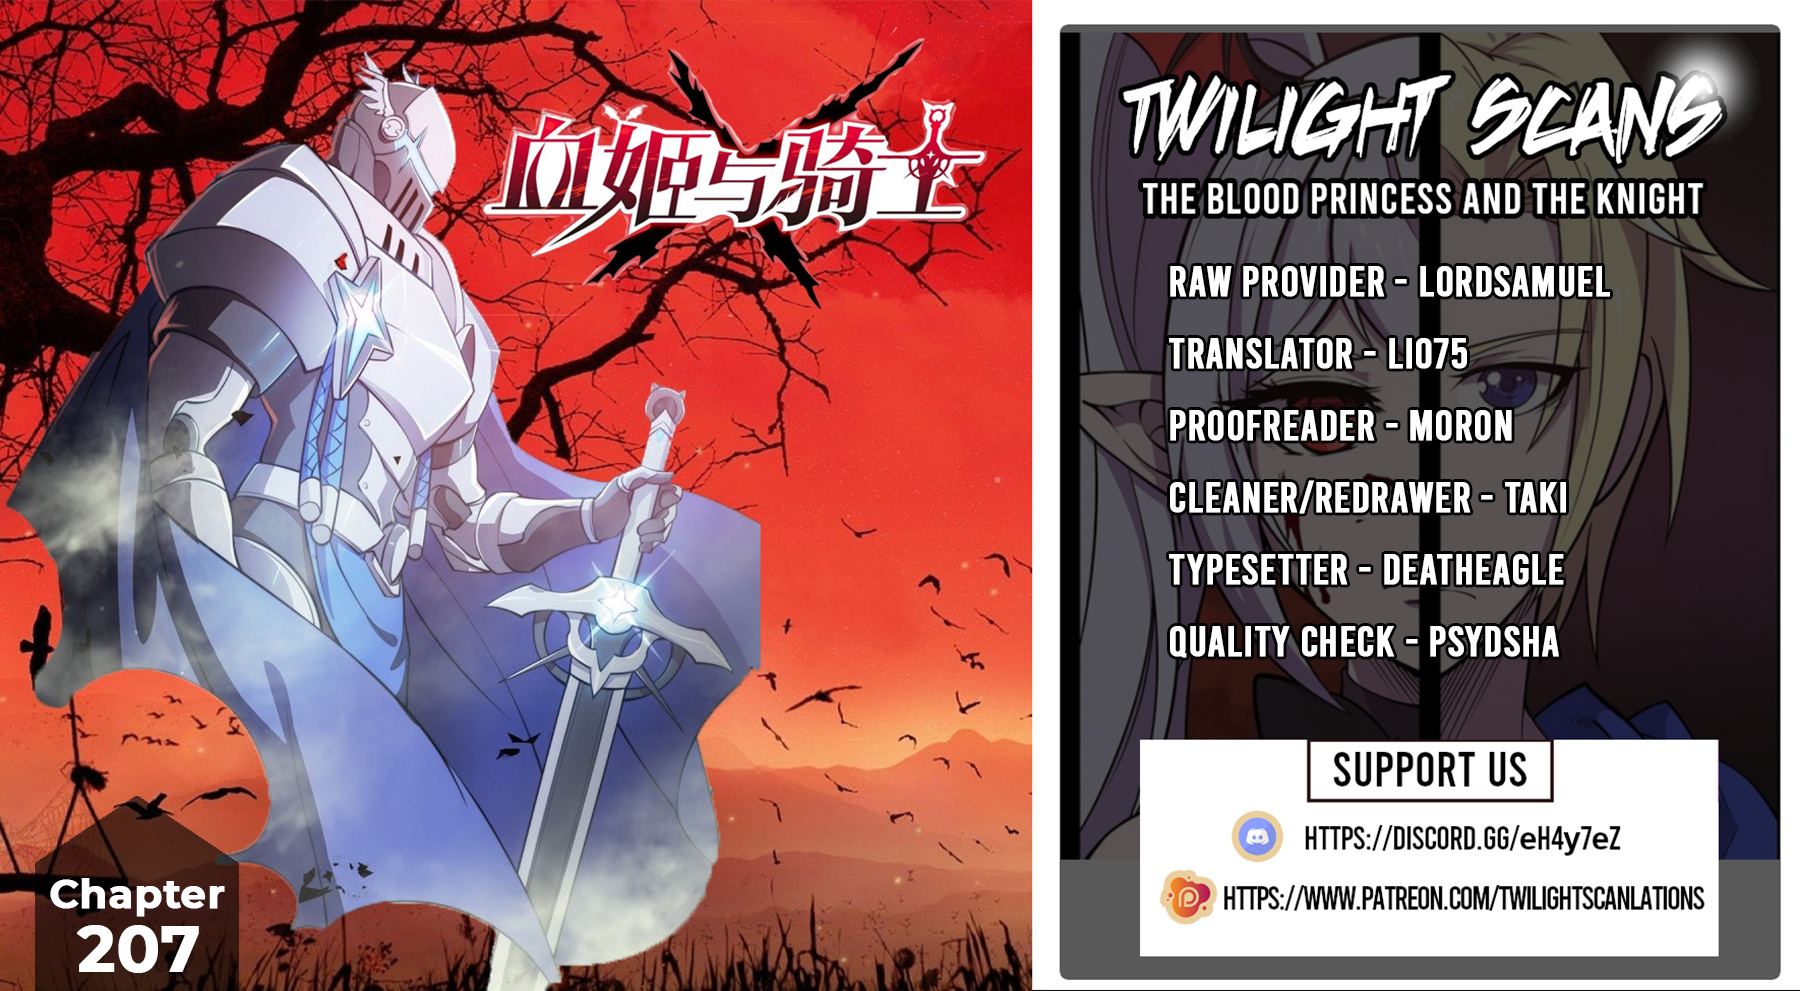 The Blood Princess And The Knight Vol.7 Chapter 207